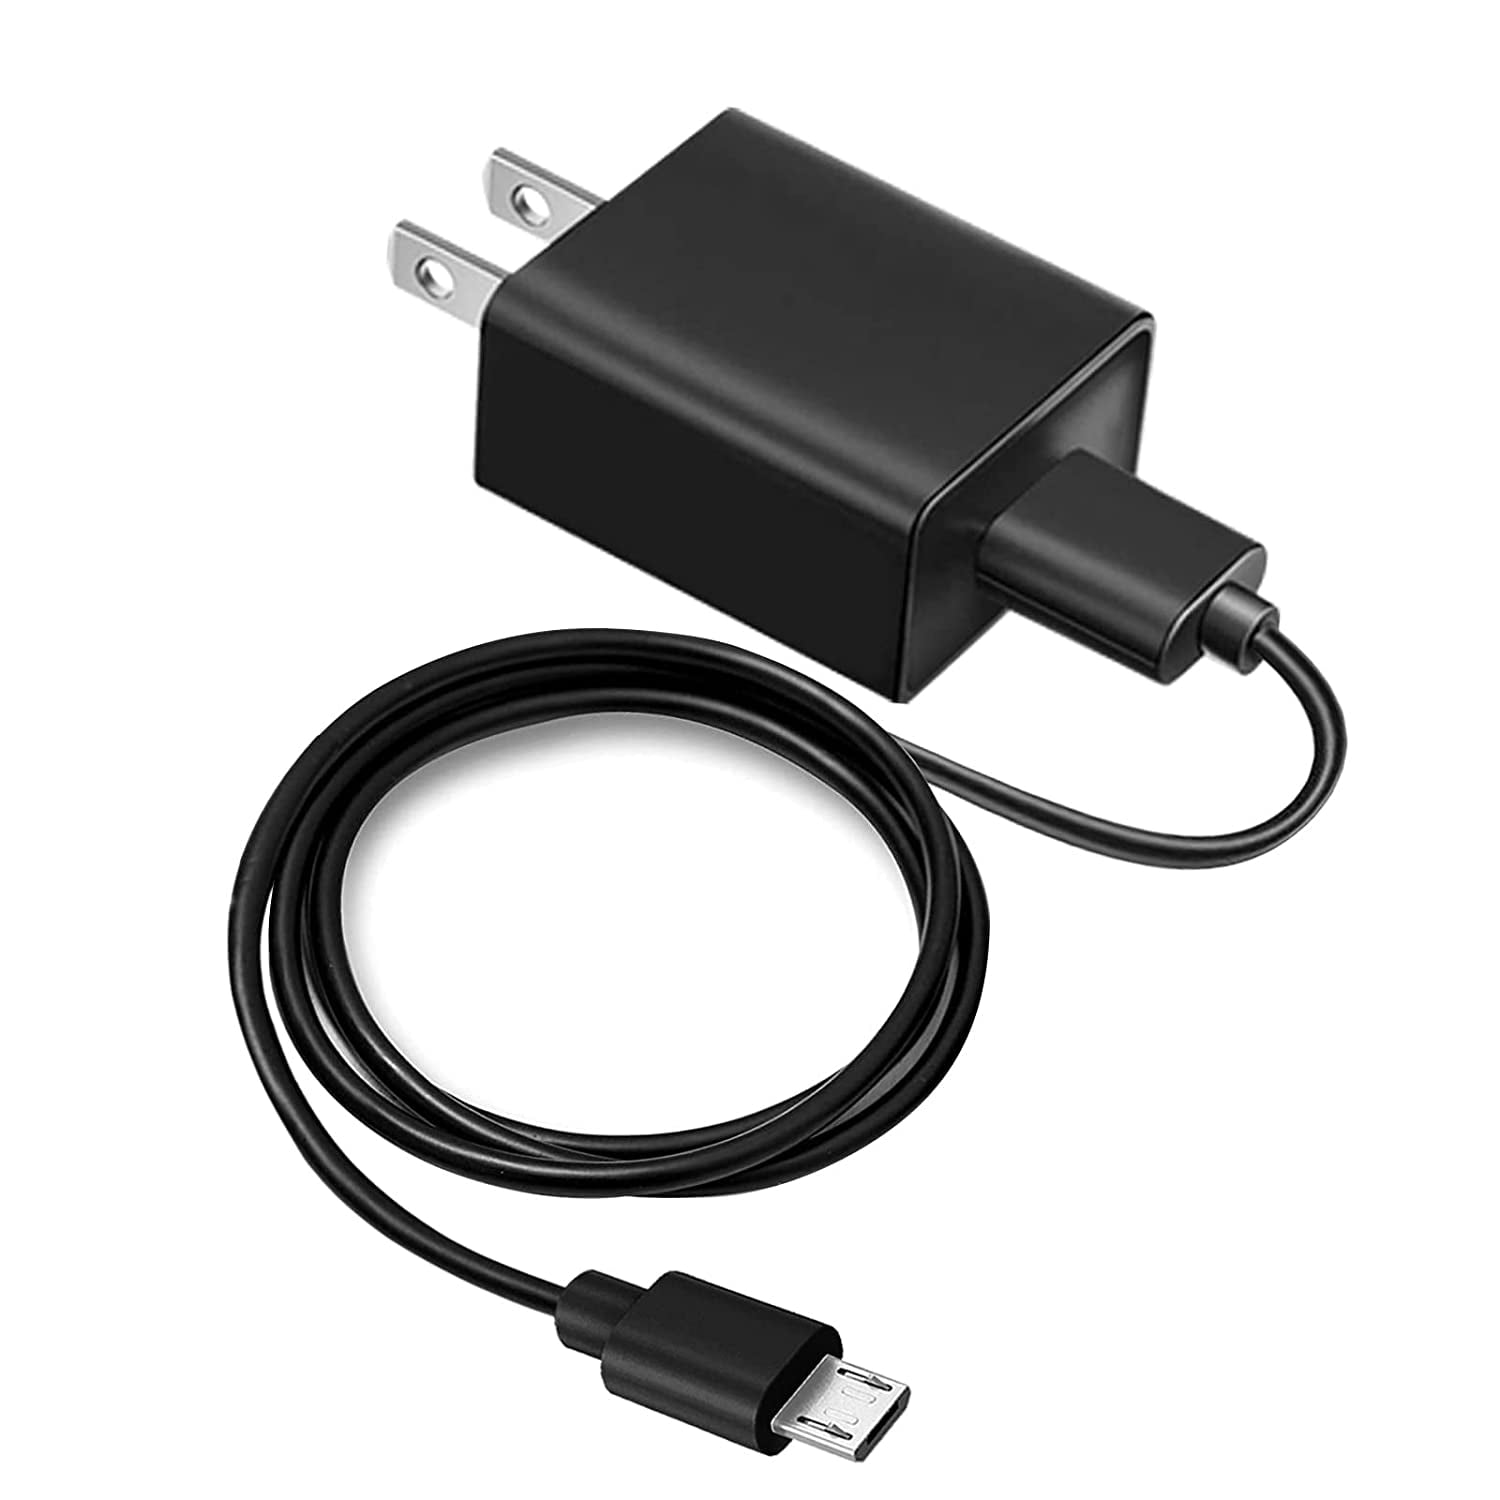 Micro USB Wall Charger Adapter for Trekstor SurfTab duo W1 ST10432